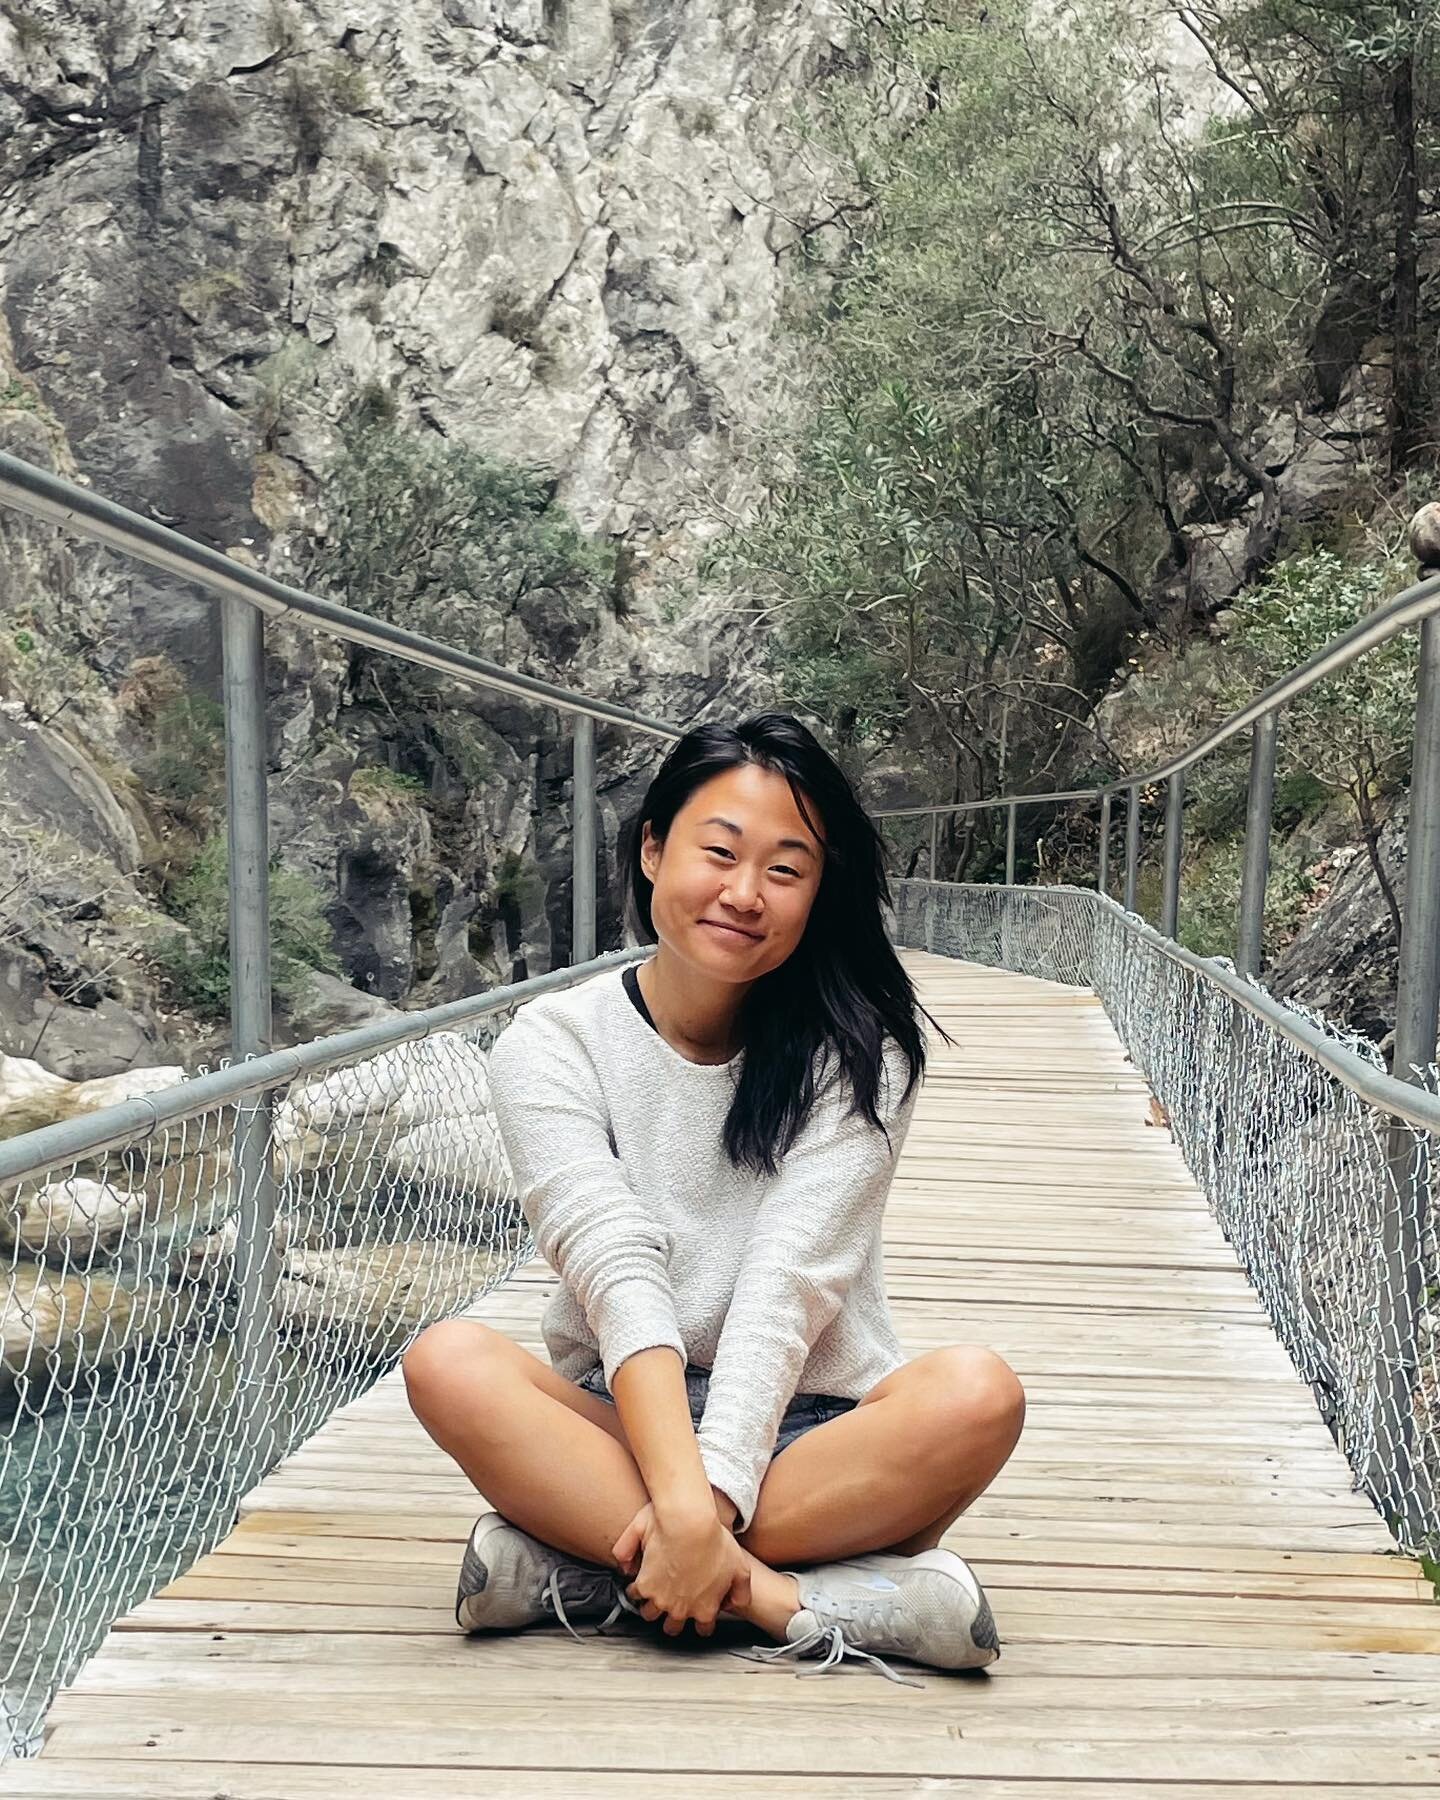 Hi, 👋
Happy new year my fellow Pineapples🍍.There are a few new faces here, so I just wanted to introduce myself.
My name is Chloe. I am a transracial adoptee. I was adopted from South Korea when I was 5 months old. I grew up feeling like I didn&rsq